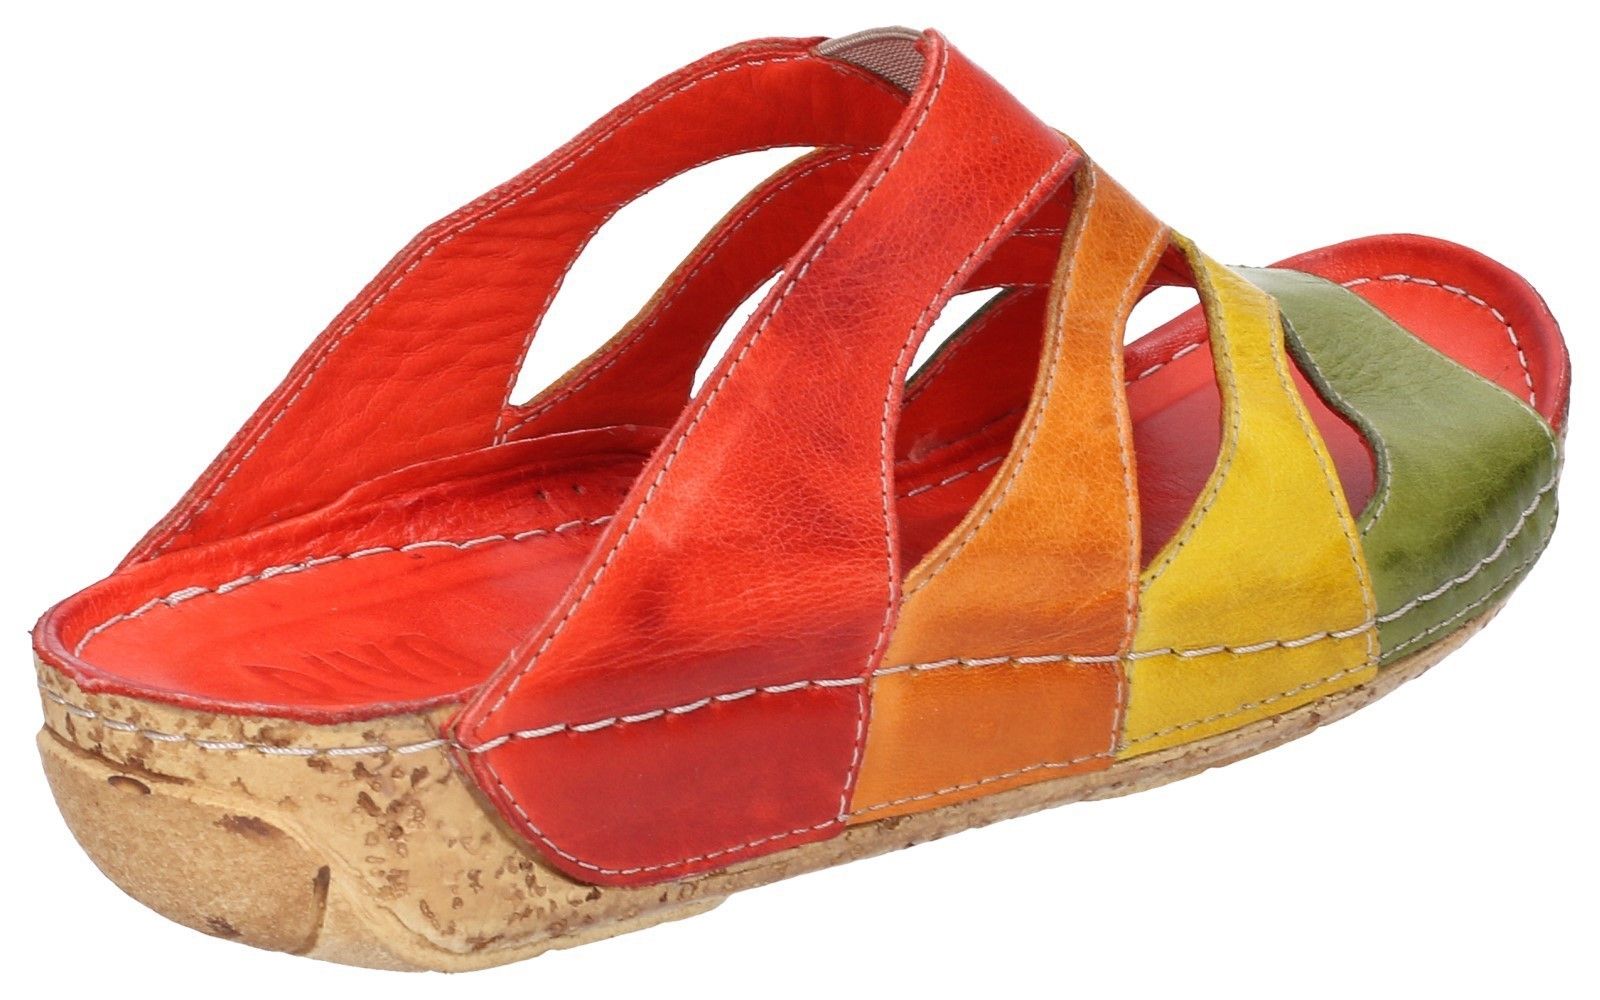 Women's luxury slip on mule sandal with supple leather multi-coloured layers with easy to slip into stretch-fit panel. Women's luxury leather open toe mule sandal. 
Multi-coloured caged upper with cut out panels. 
Elastic V-neck stretch fit gusset. 
Barefoot soft supple leather lining. 
Lightly padded leather-lined foam foot bed.